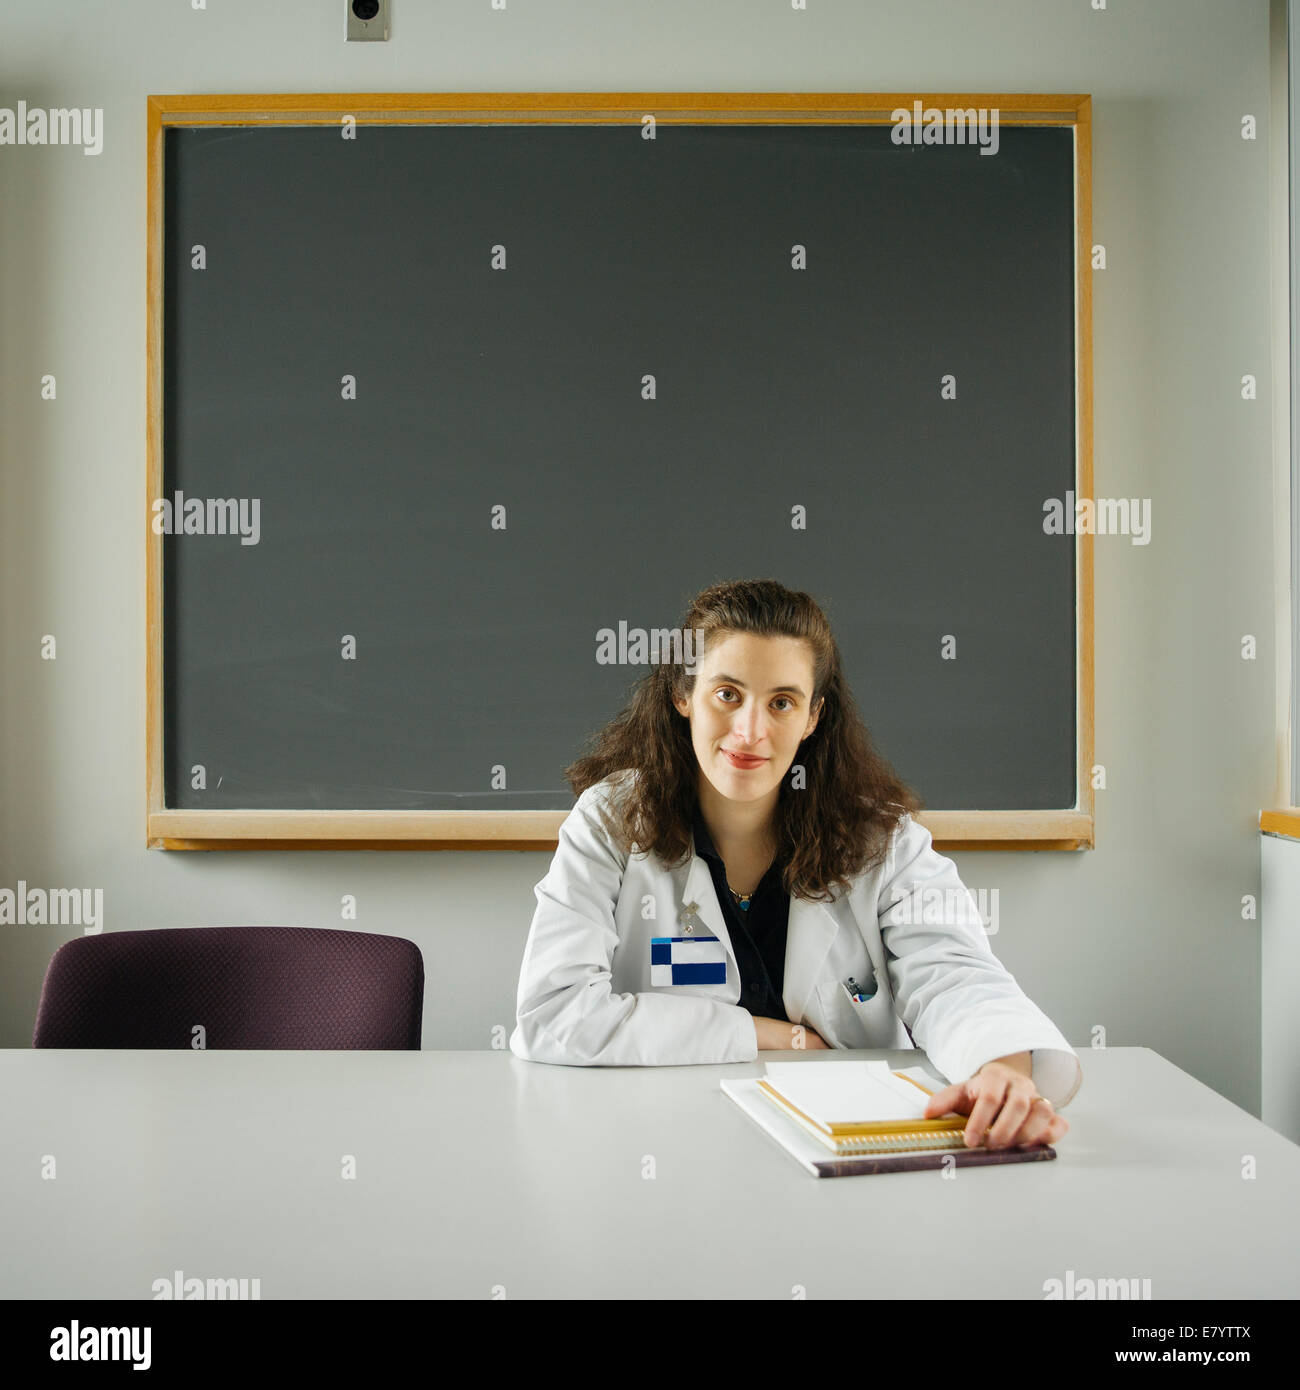 Woman at classroom desk with chalkboard in background Stock Photo